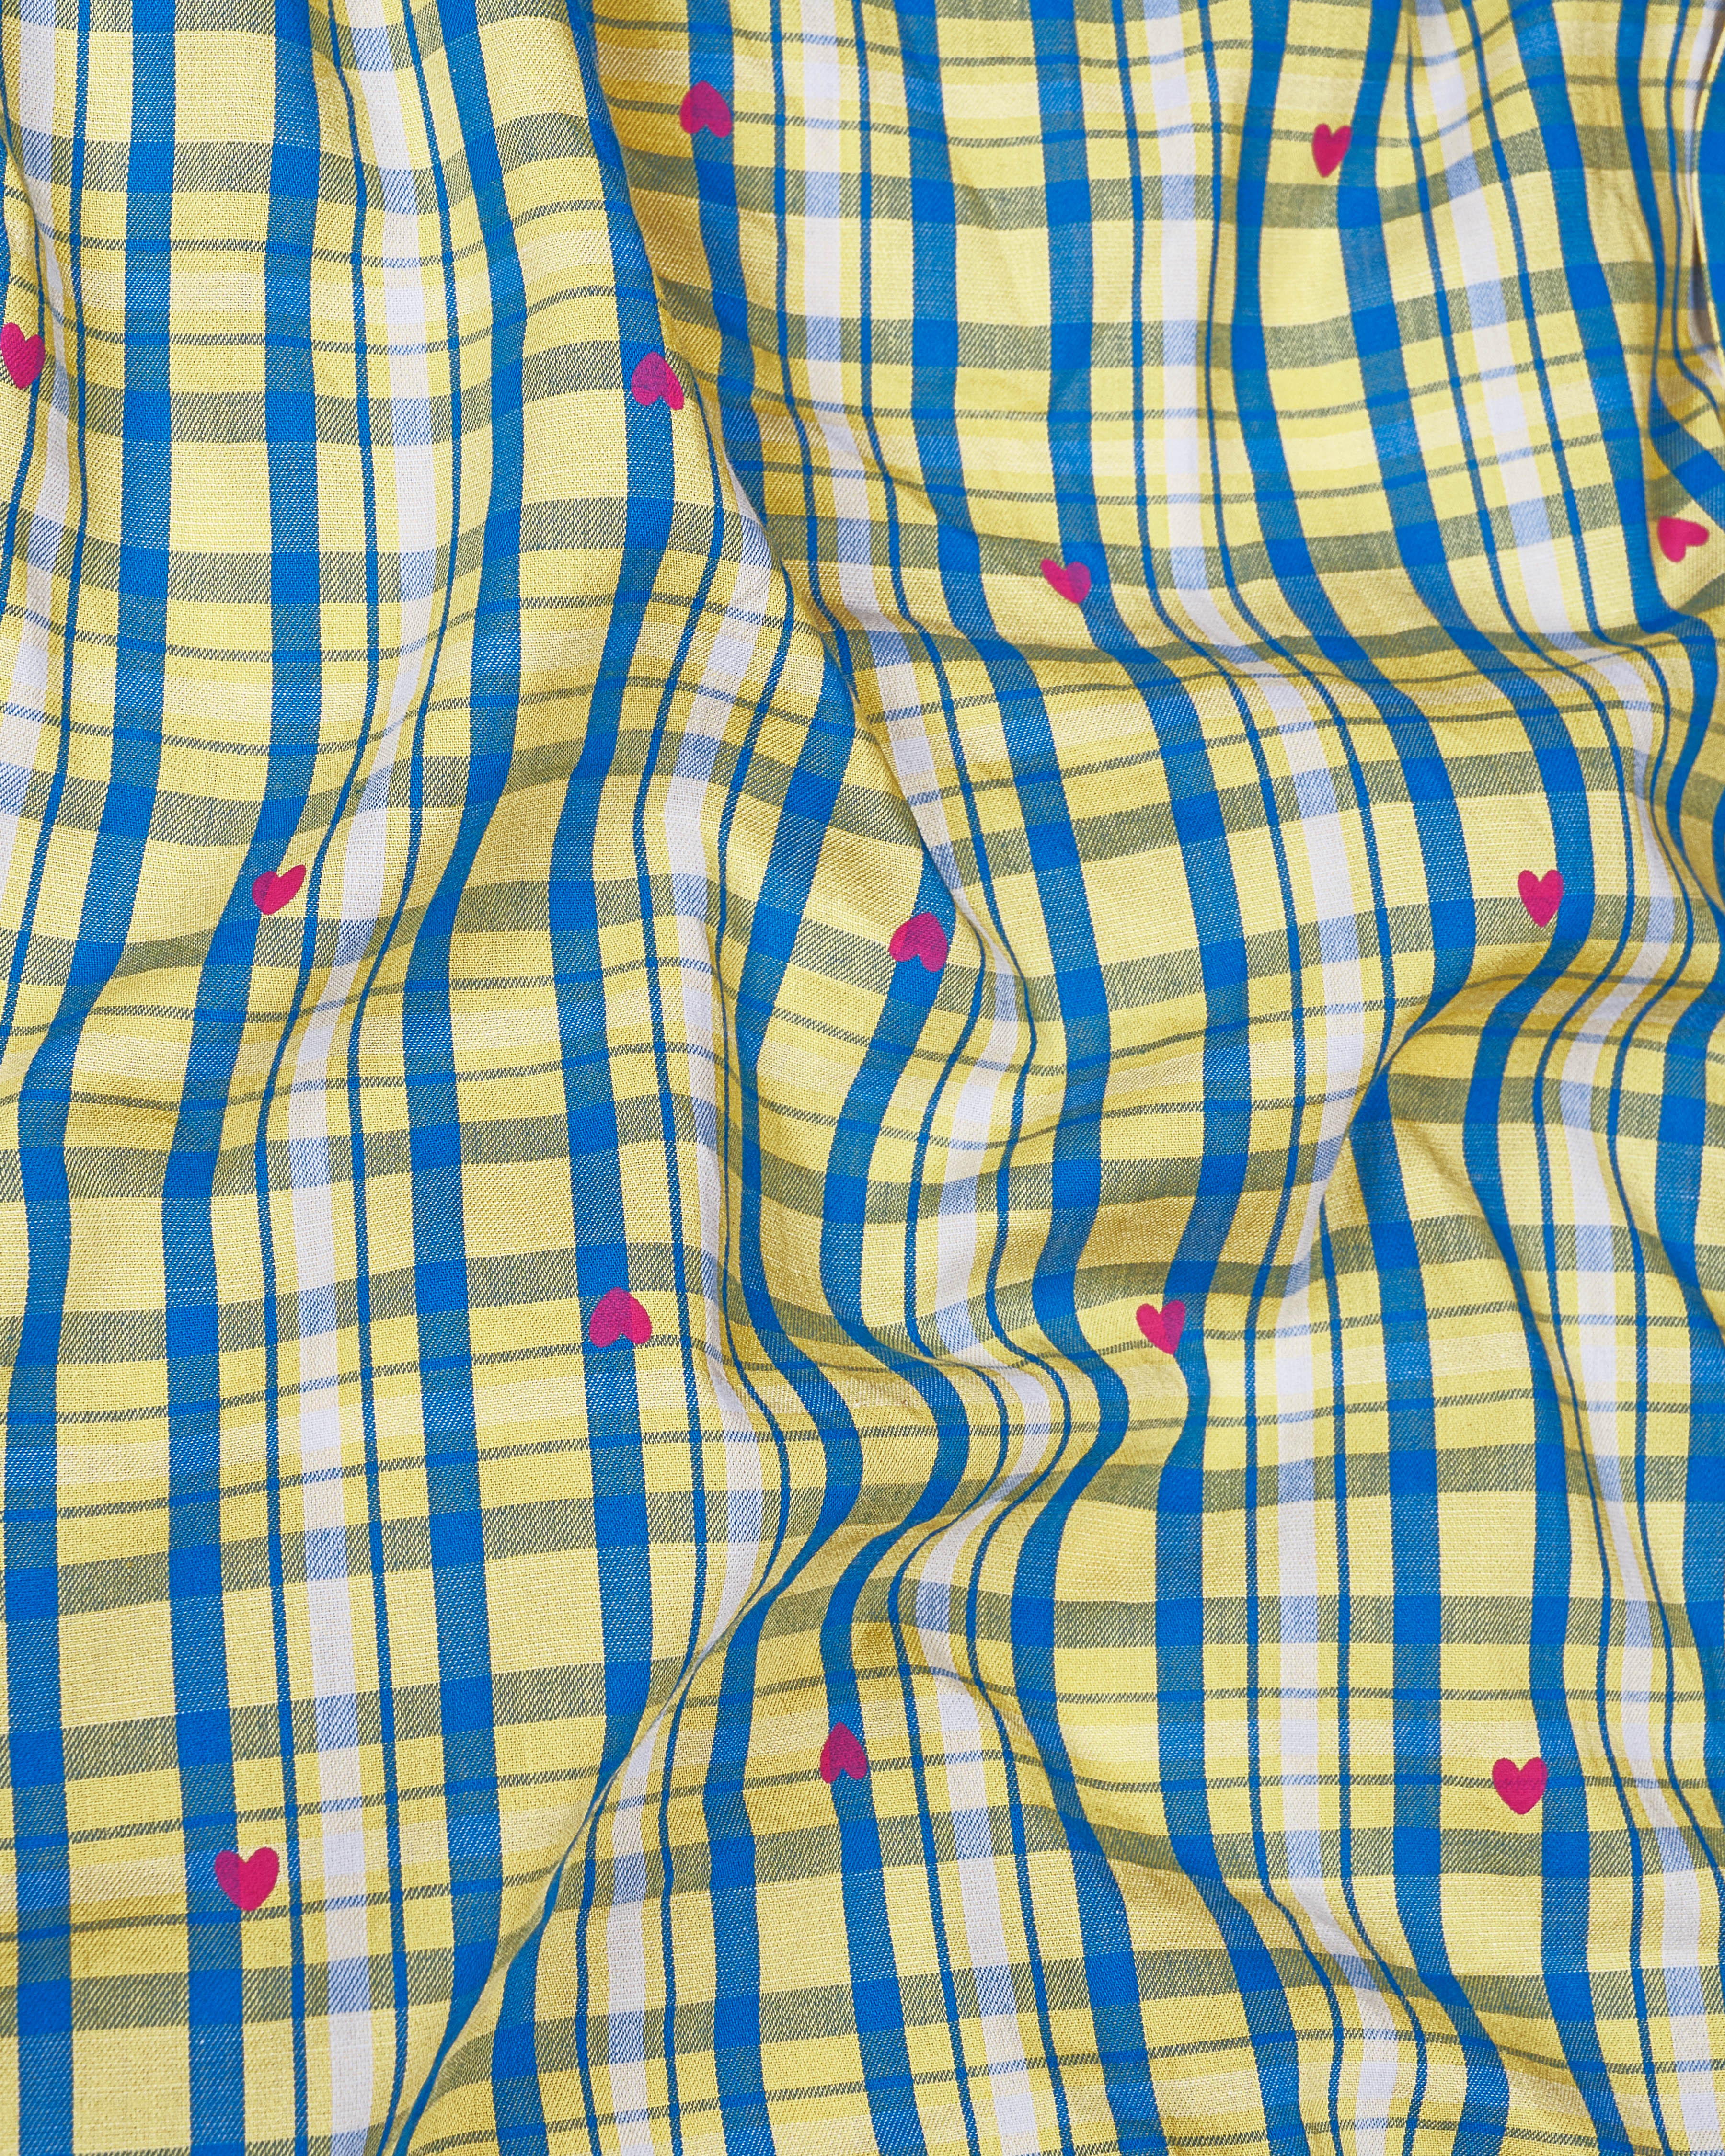 Marzipan Yellow with Matisse Blue Checkered with Heart Printed Premium Cotton Shirt